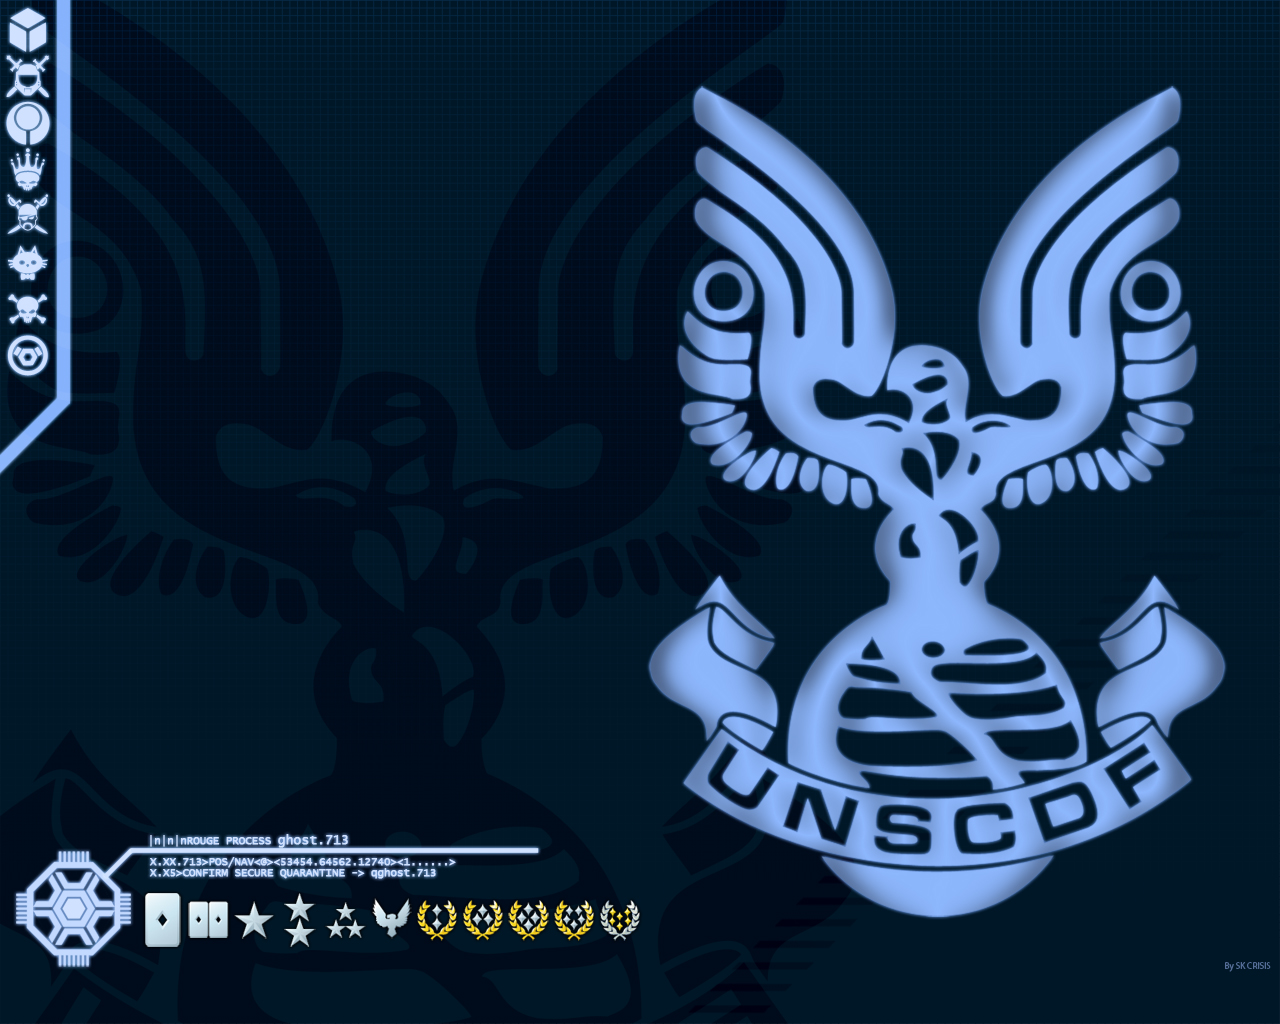 Halo Unsc Logobungie Forum Official Unscdf Wallpaper Tytmyff